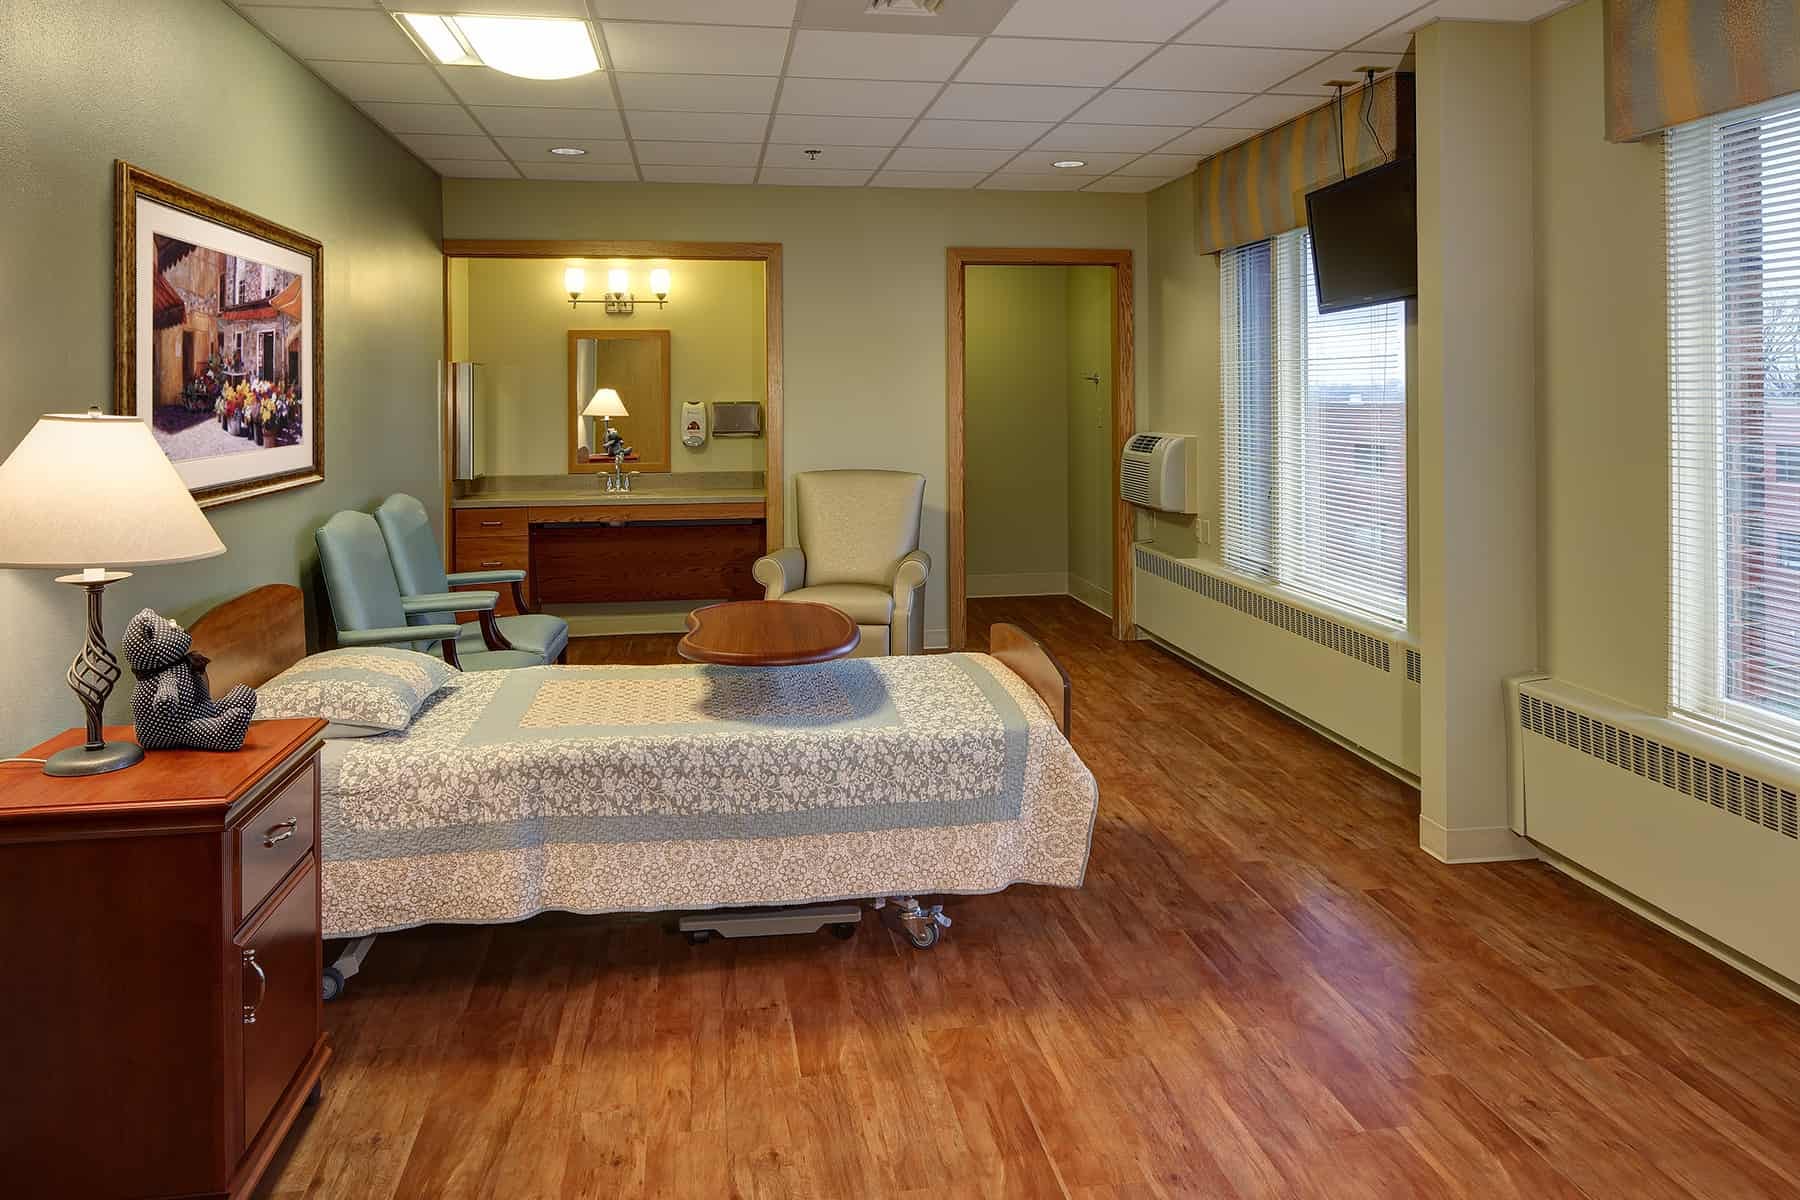 Guest room at the lutheran home, vistas hospice